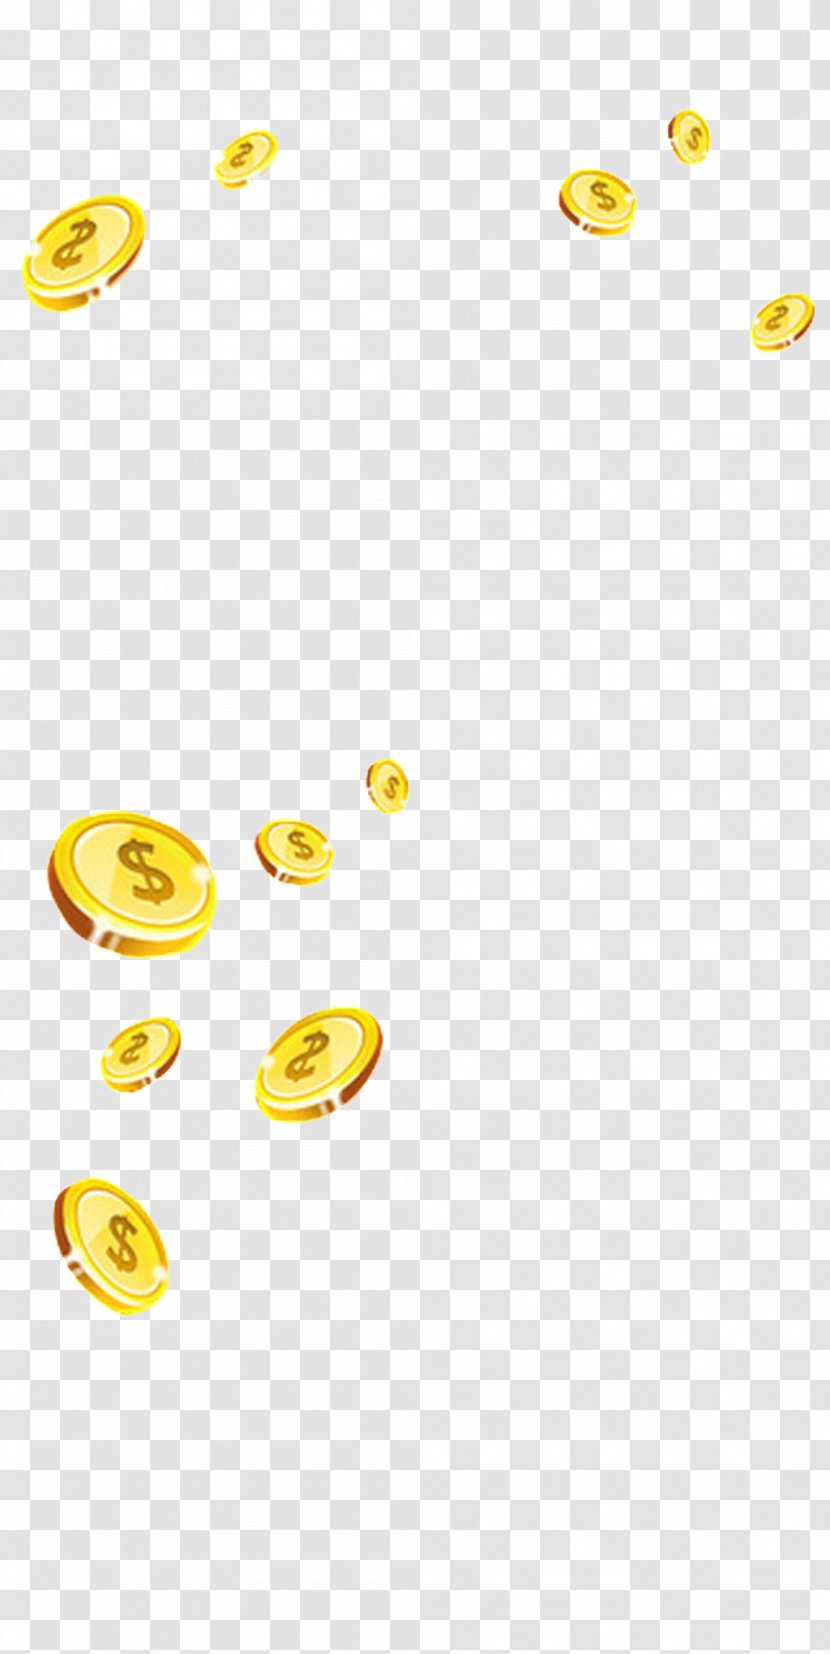 Gold Coin - Sycee Transparent PNG